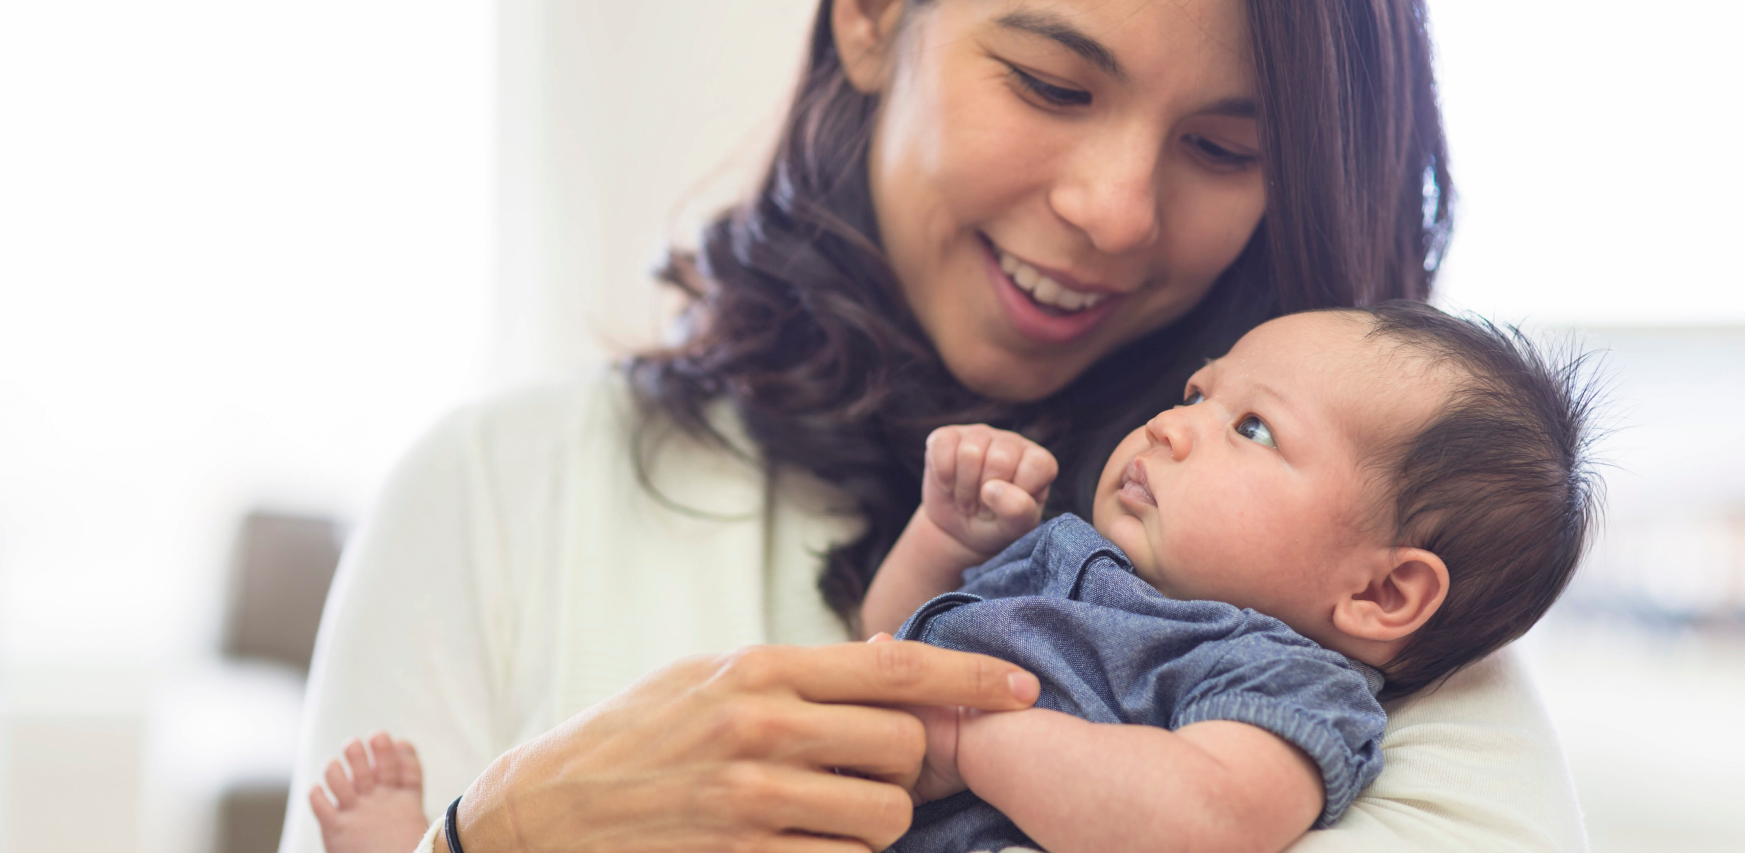 Postpartum: A Guide to Caring for You and Baby after Birth